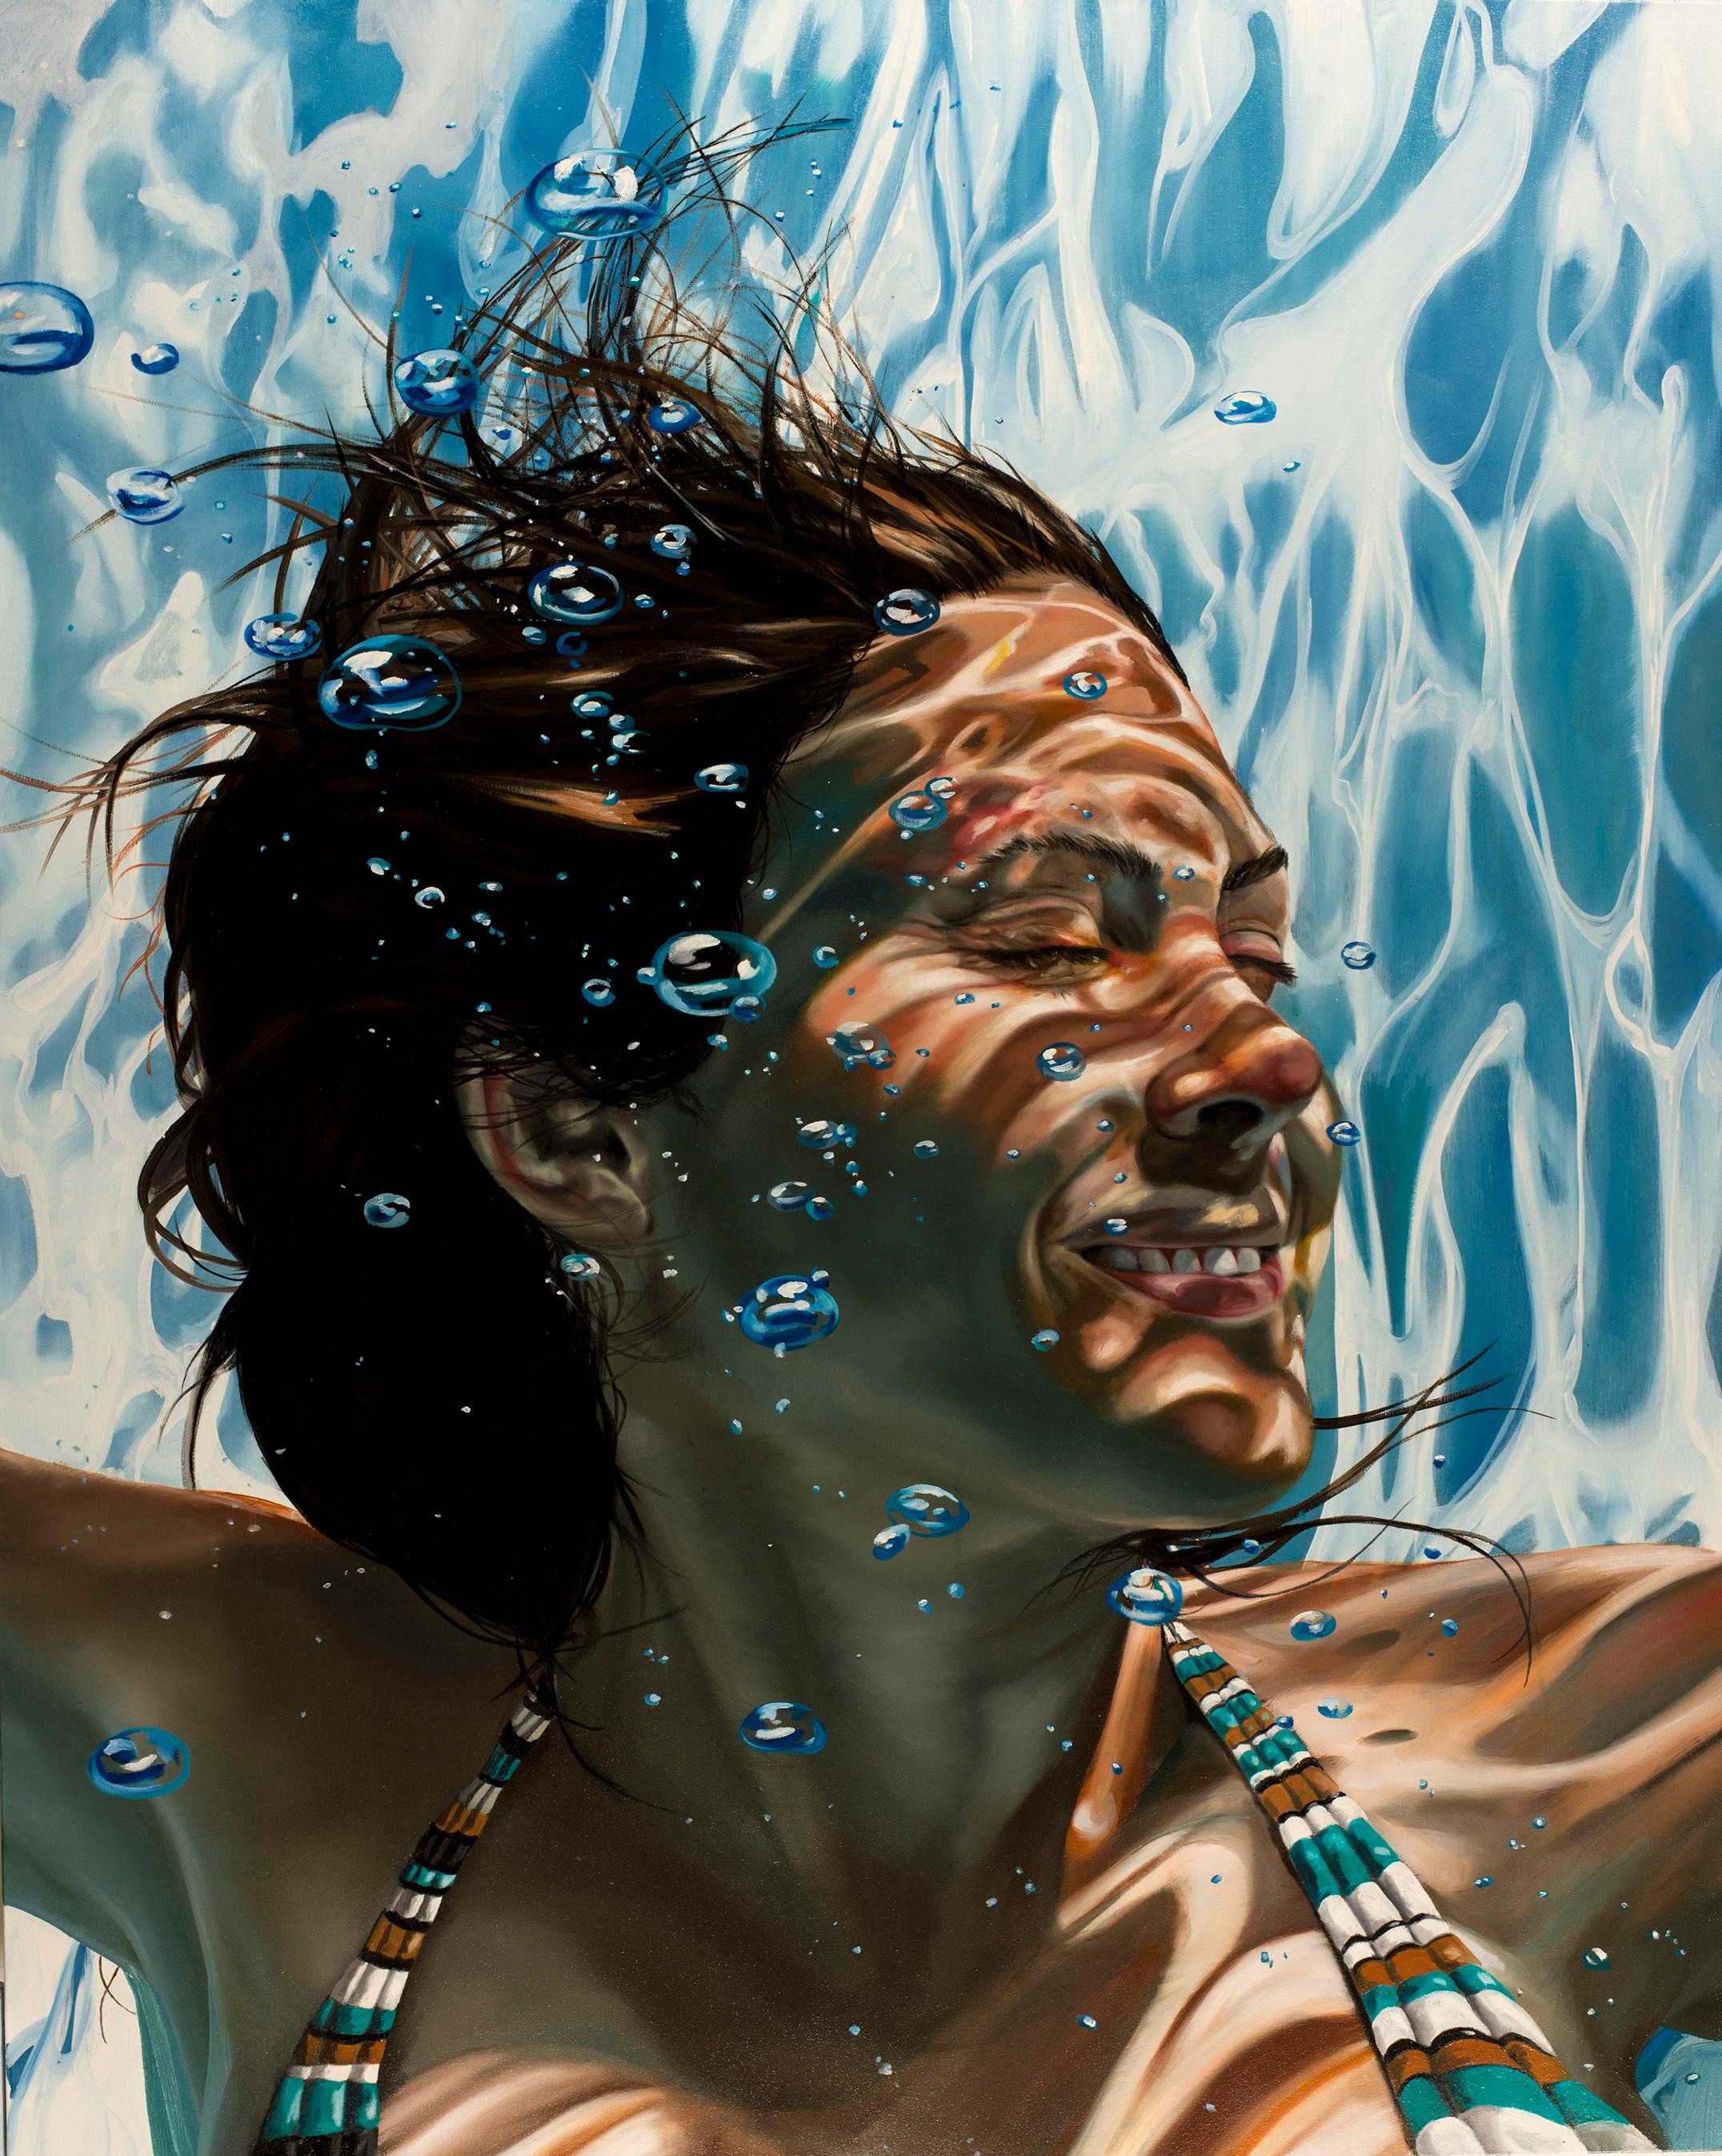 Eric Zener Portrait Painting - HOW TO BE HAPPY - Underwater Photorealism / Female Swimmer / Large Portrait